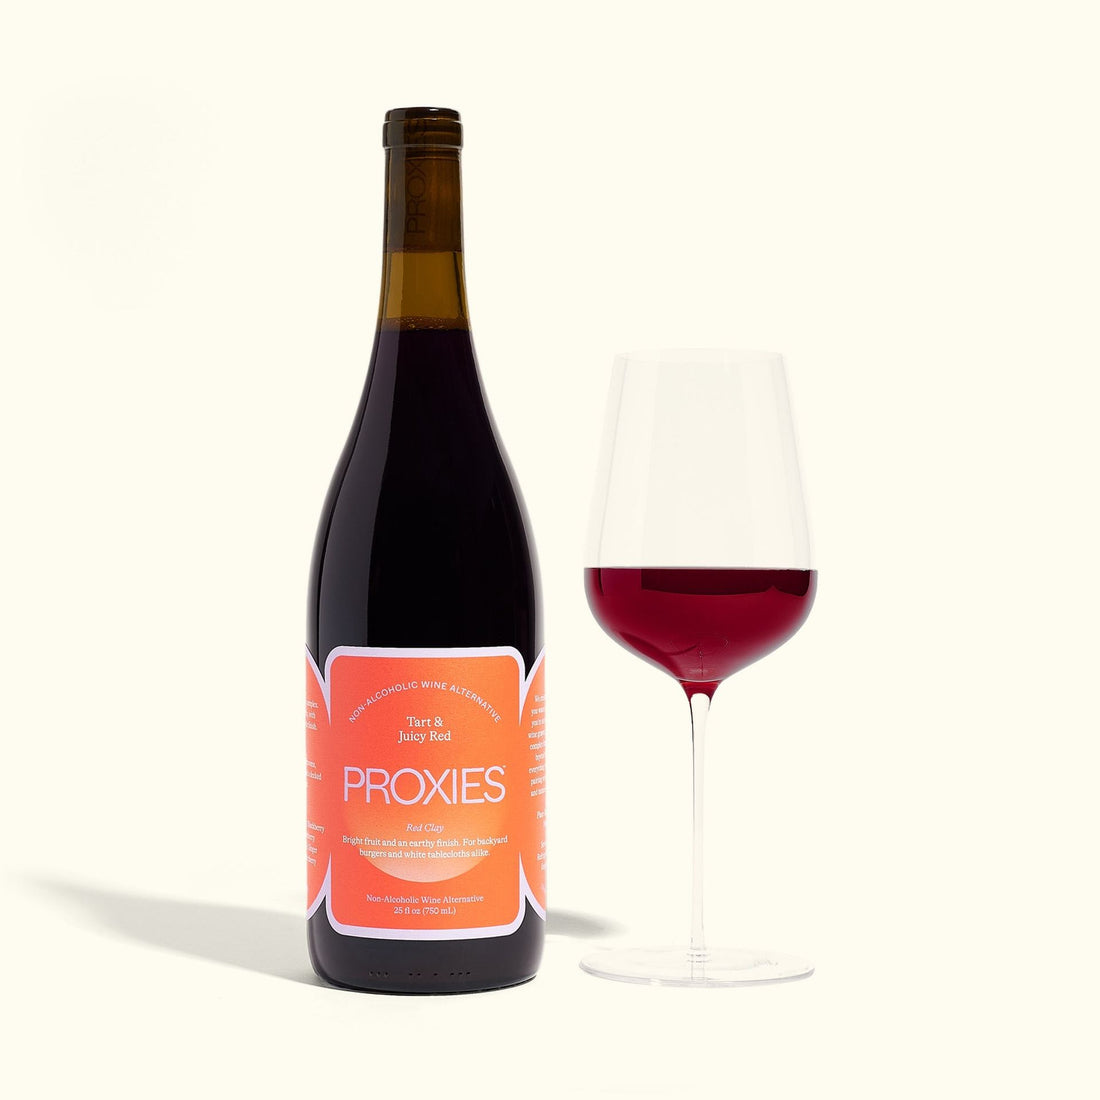 Proxies "Red Clay" Non-alcoholic Red